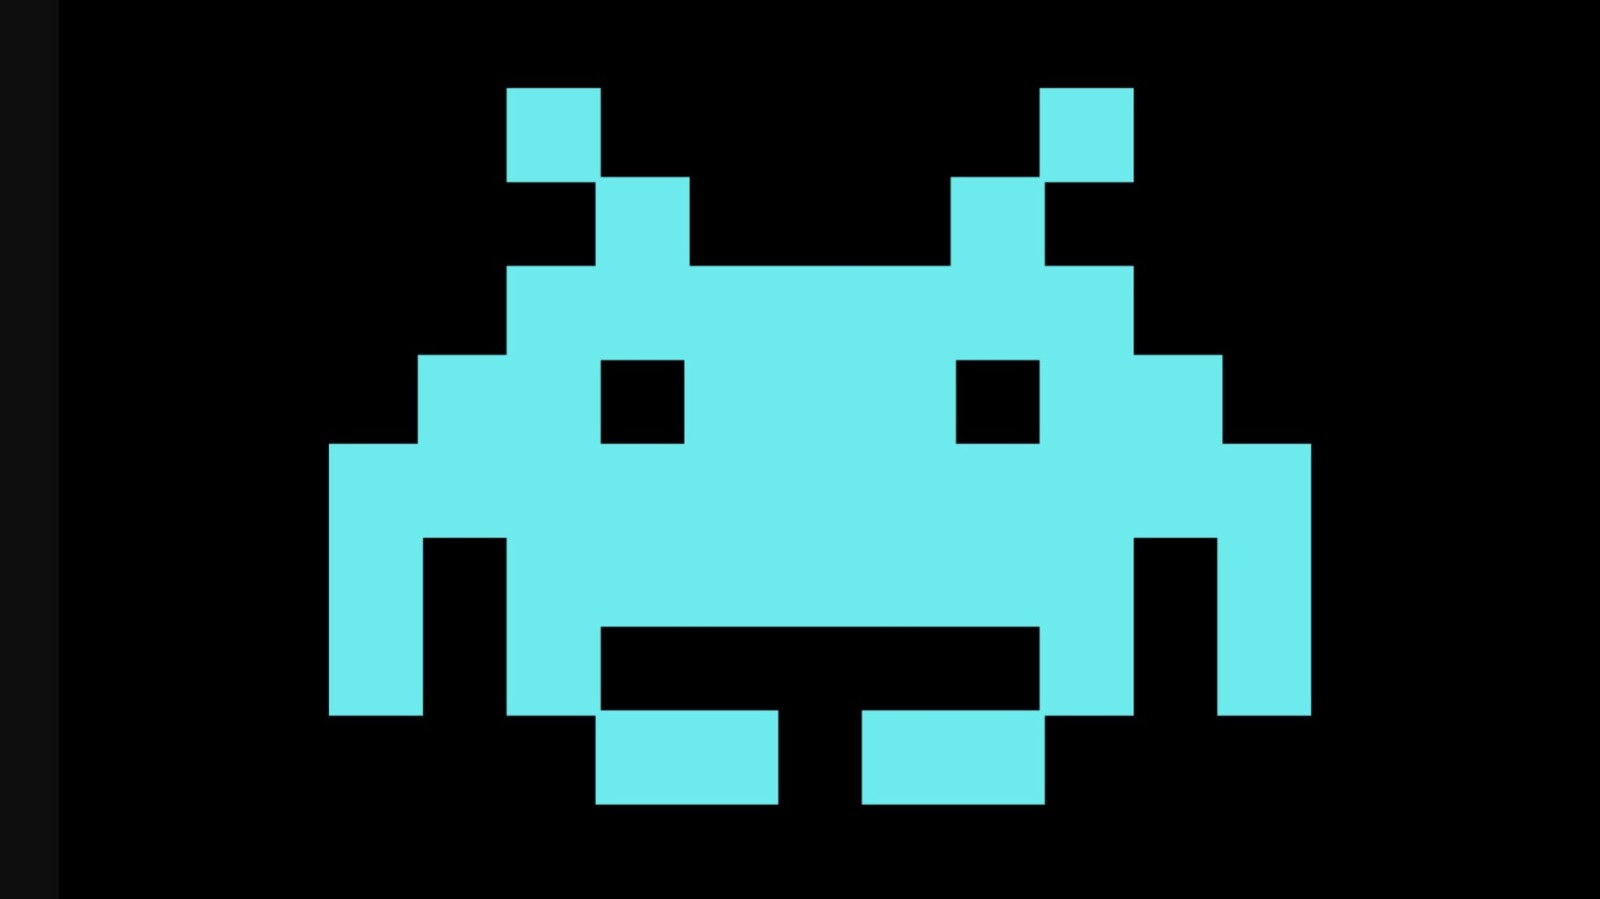 The Original Idea Behind Space Invaders That Could Have Changed Gaming